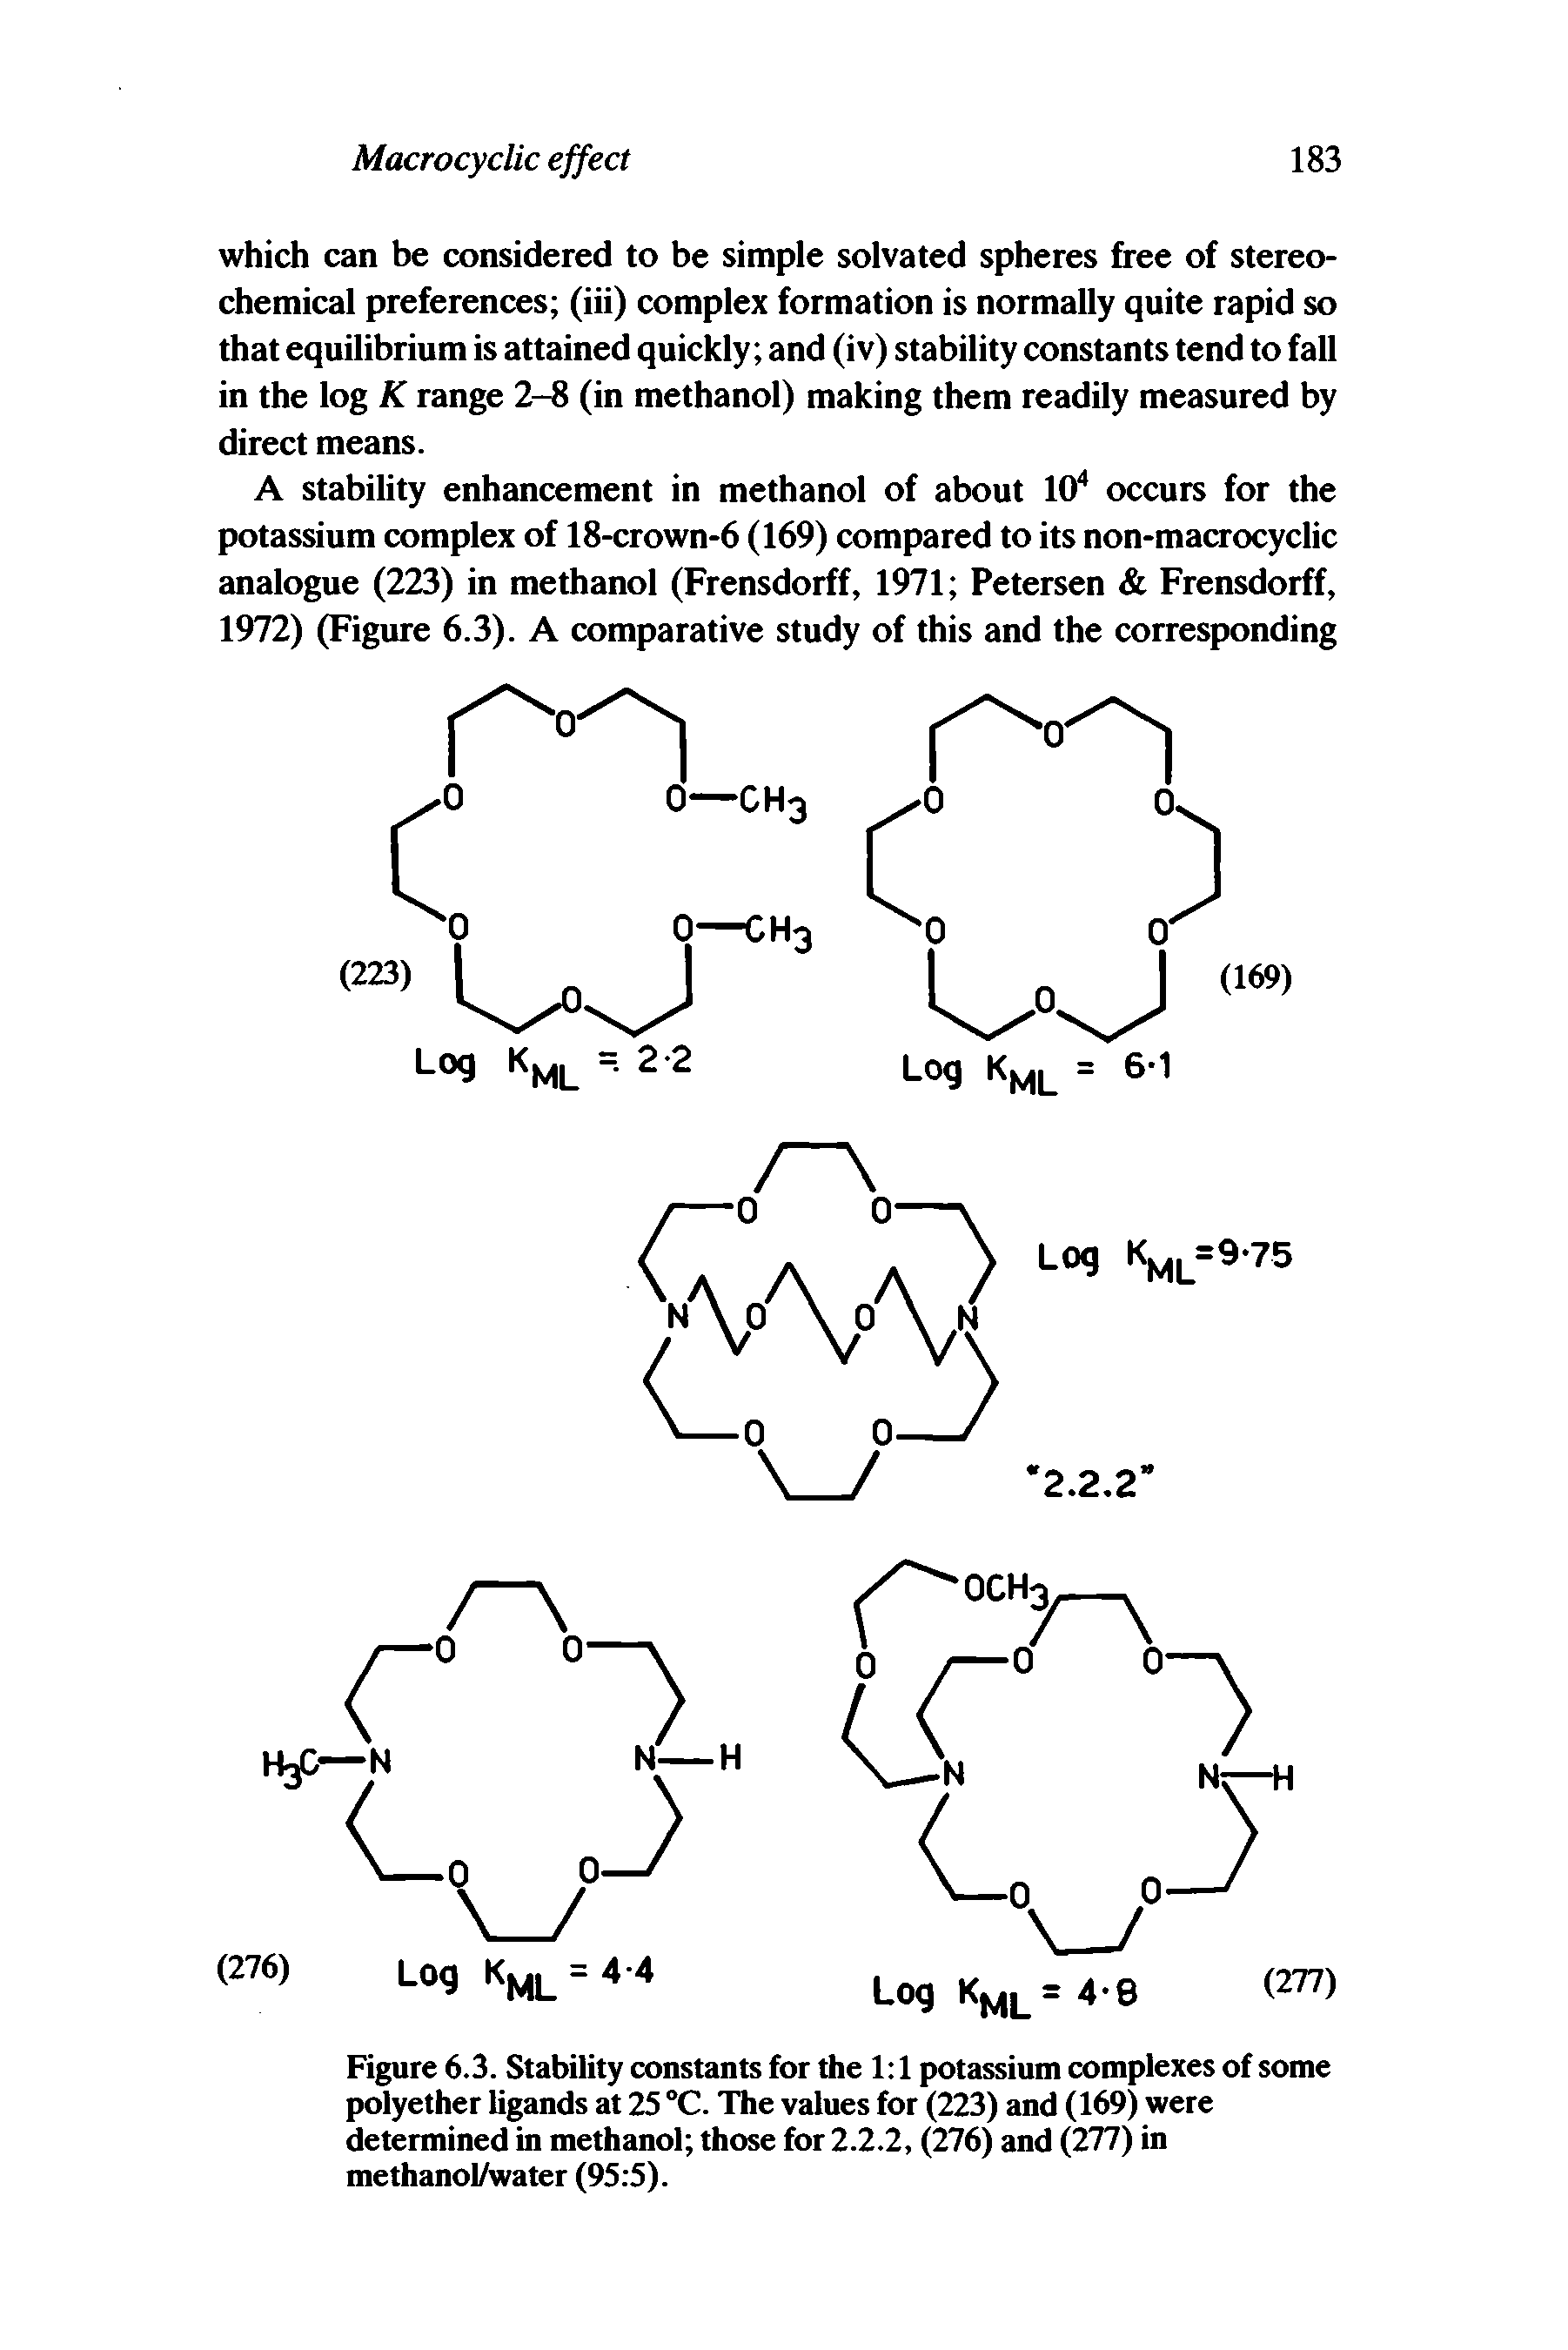 Figure 6.3. Stability constants for the 1 1 potassium complexes of some polyether ligands at 25 °C. The values for (223) and (169) were determined in methanol those for 2.2.2, (276) and (277) in methanol/water (95 5).